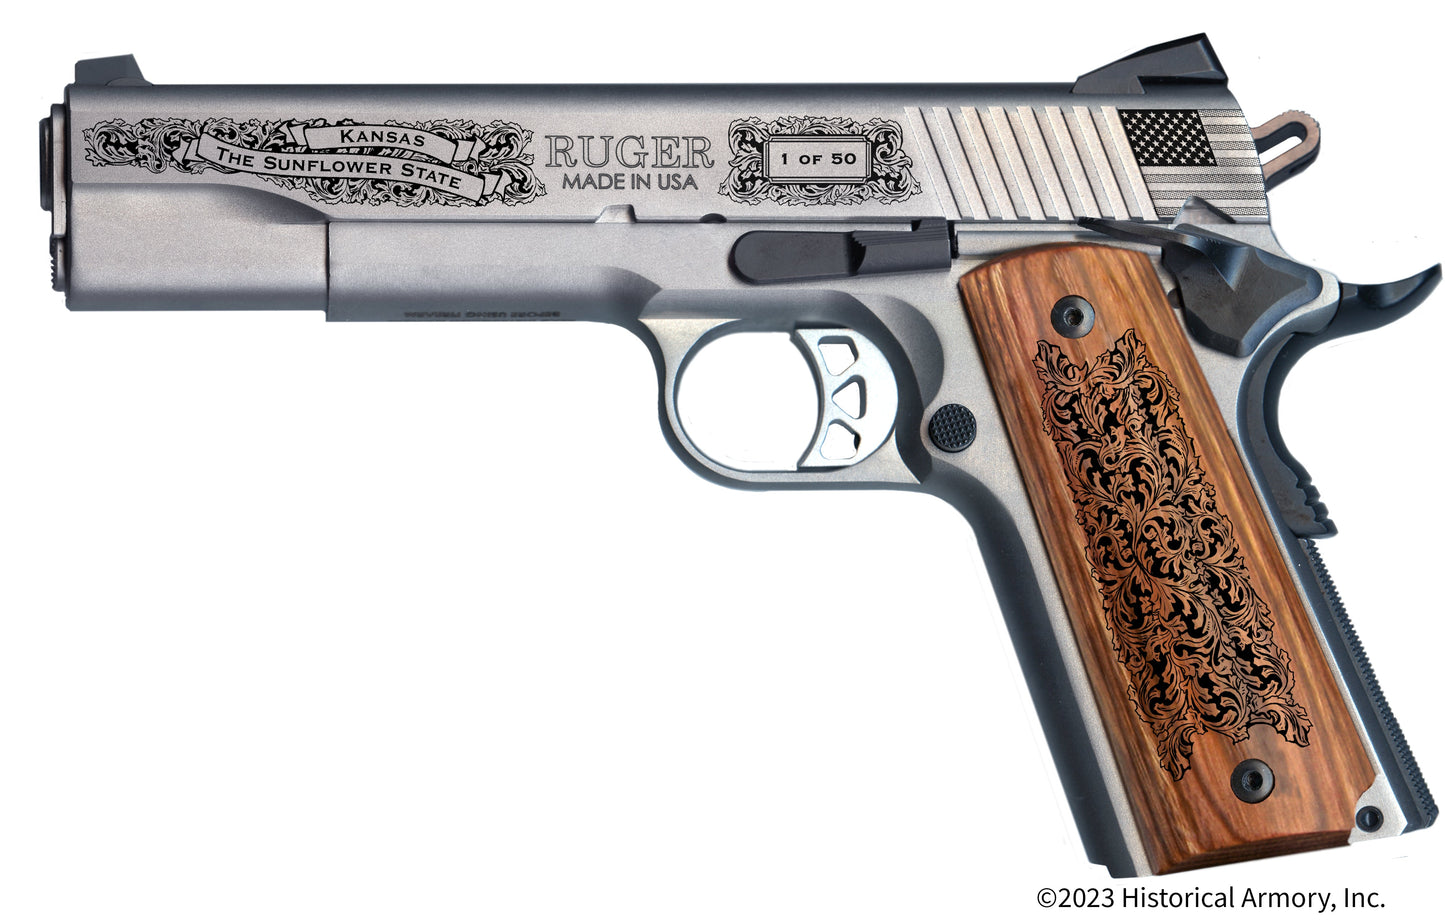 Crawford County Kansas Engraved .45 Auto Ruger 1911